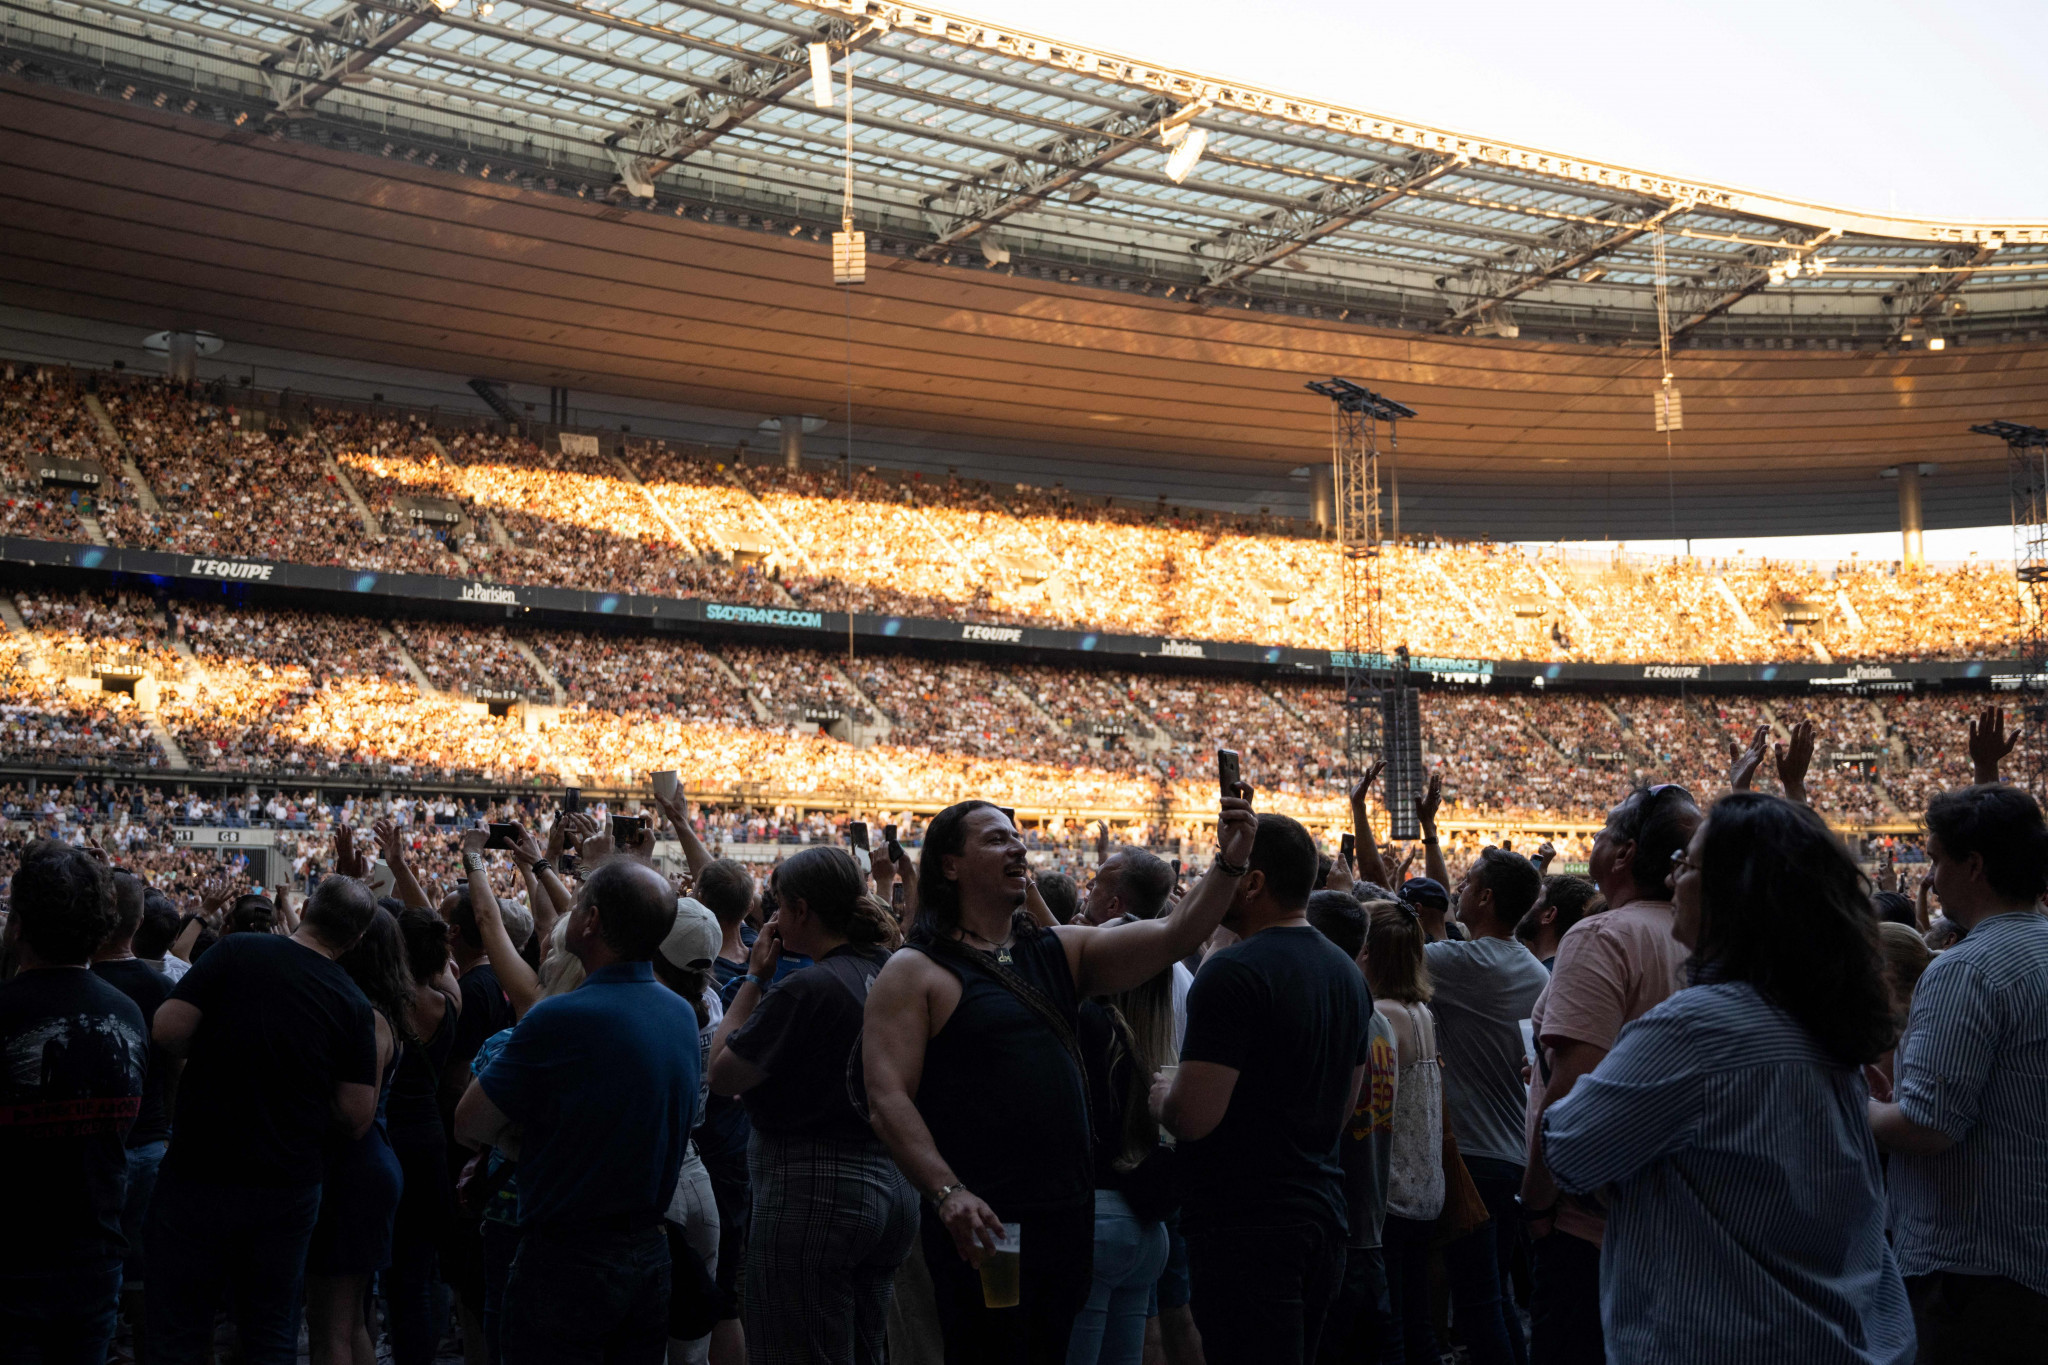 Continuing major events such as concerts at the Stade de France is one of the conditions for a takeover of the venue in 2025 ©Getty Images